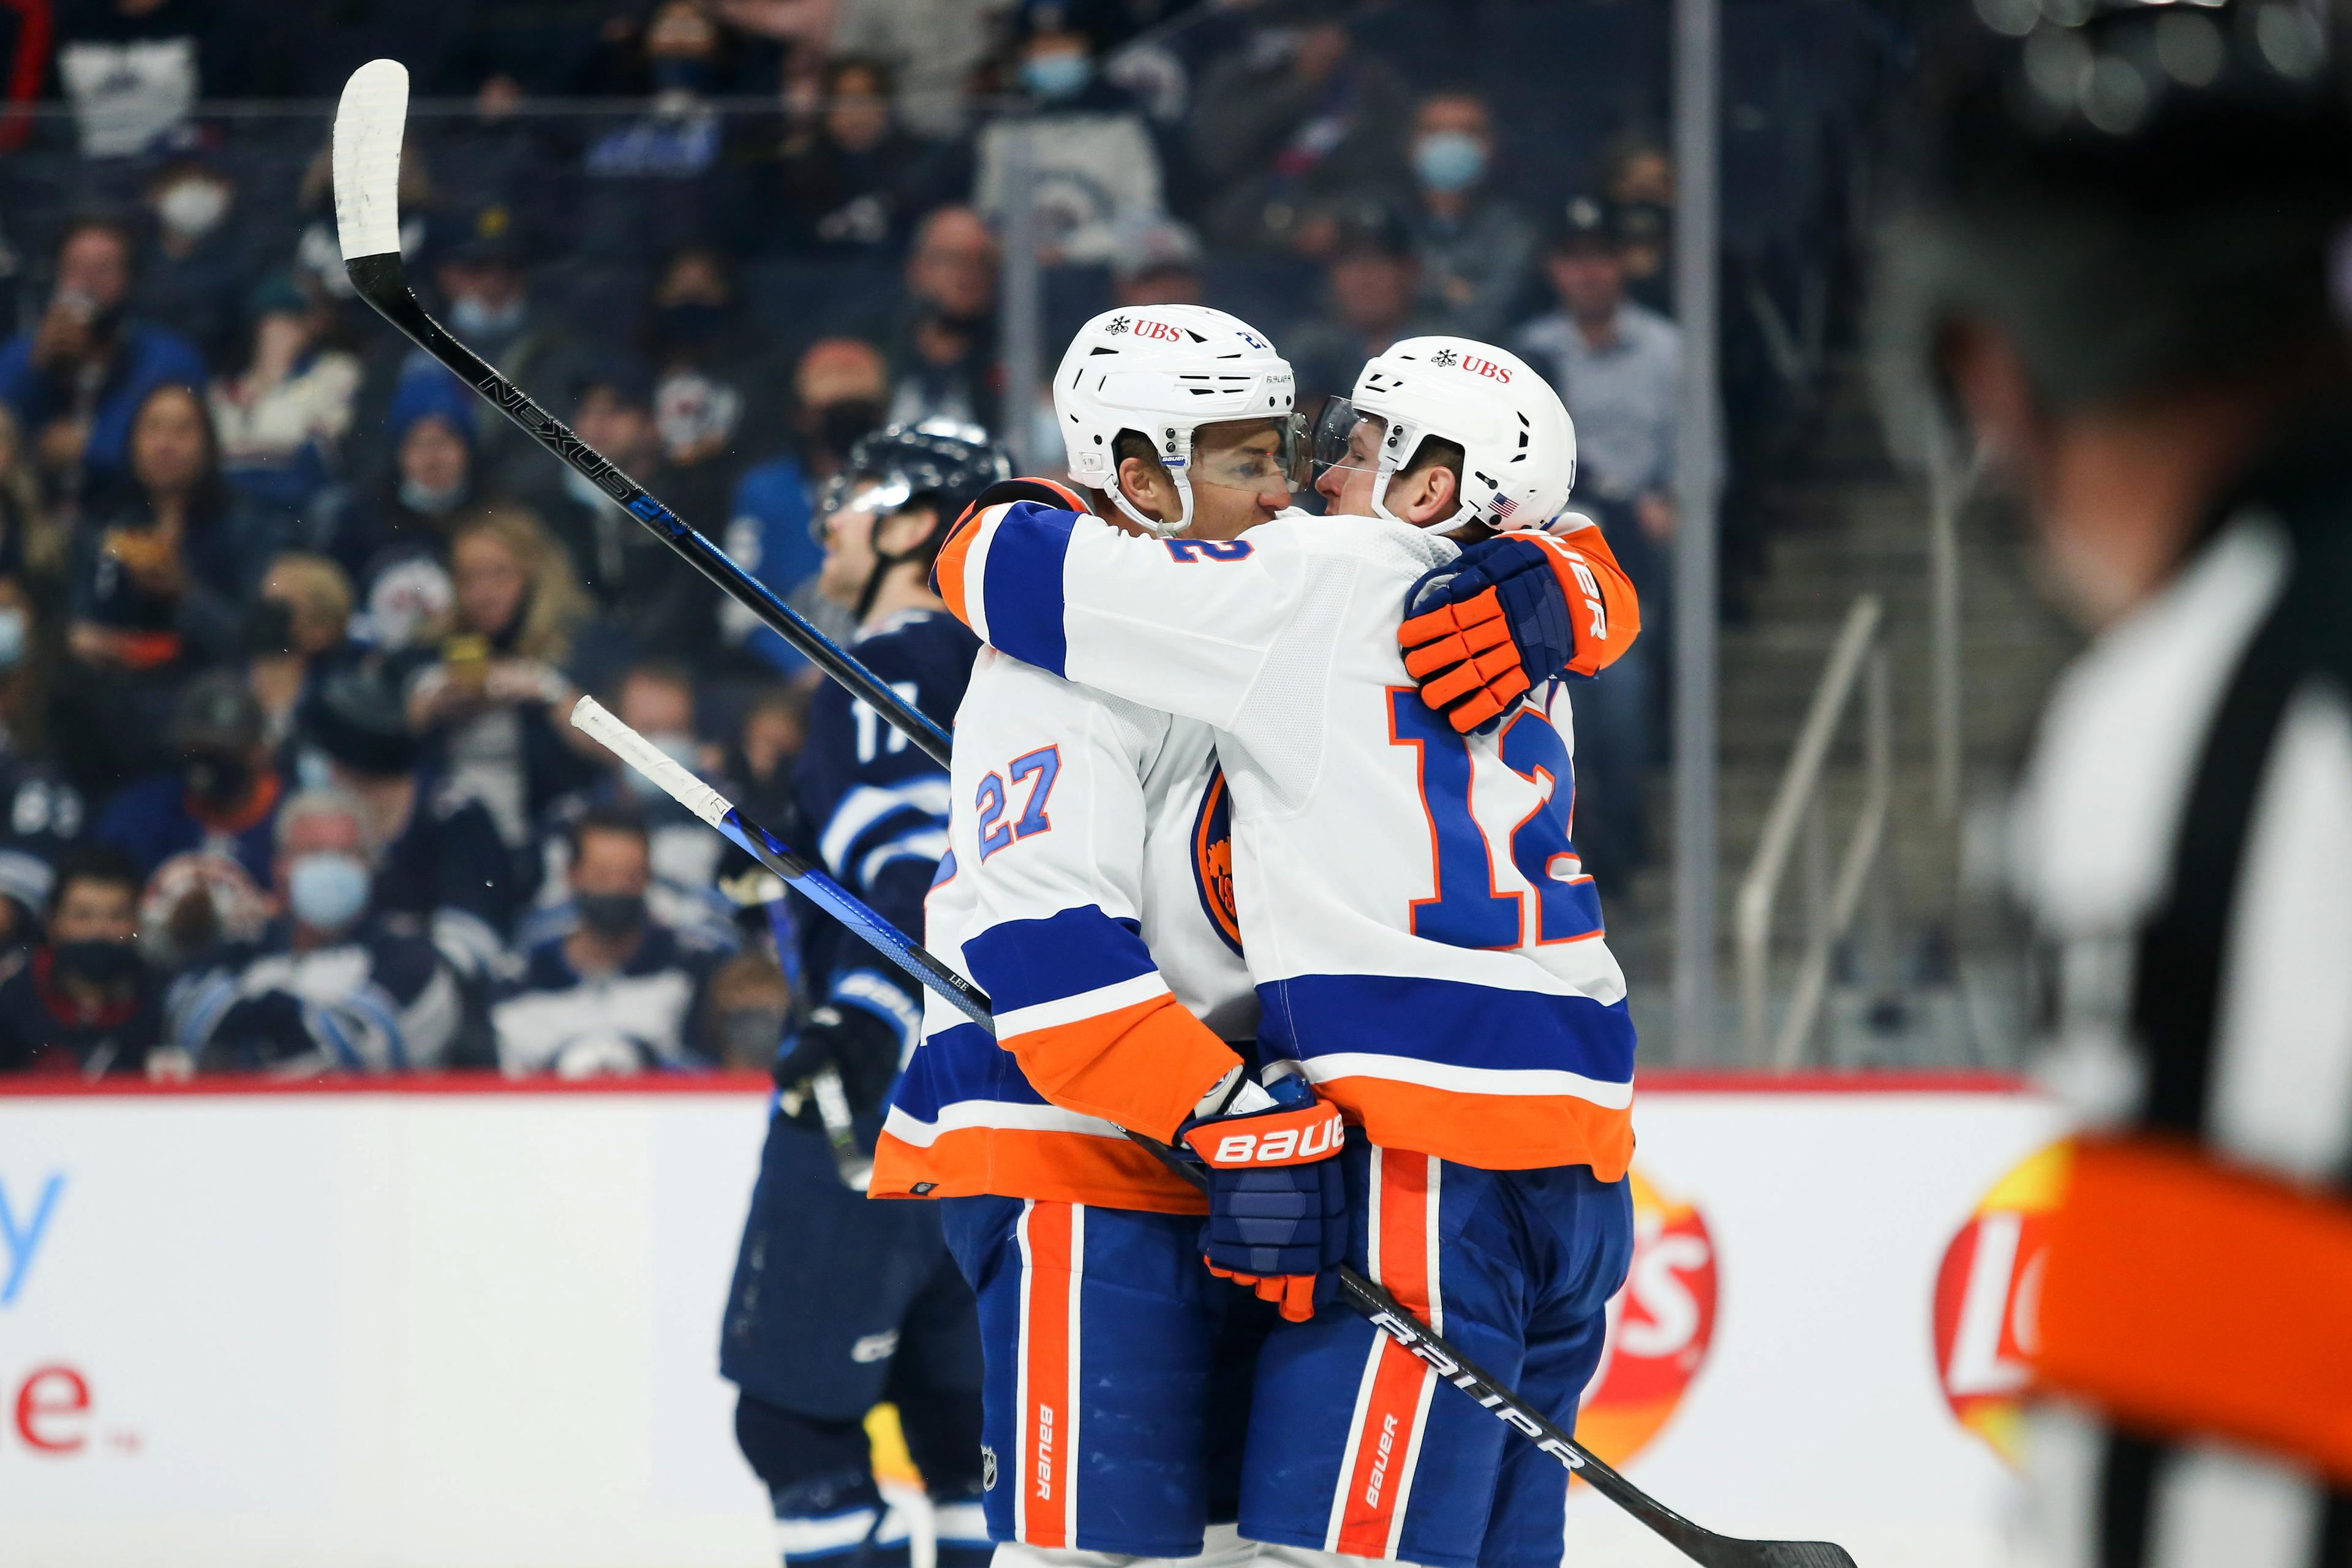 New York Islanders forward Anders Lee (27) celebrates with forward Josh Bailey (12) after scoring a goal against the Winnipeg Jets during the first period at Canada Life Centre. / Terrence Lee-USA TODAY Sports